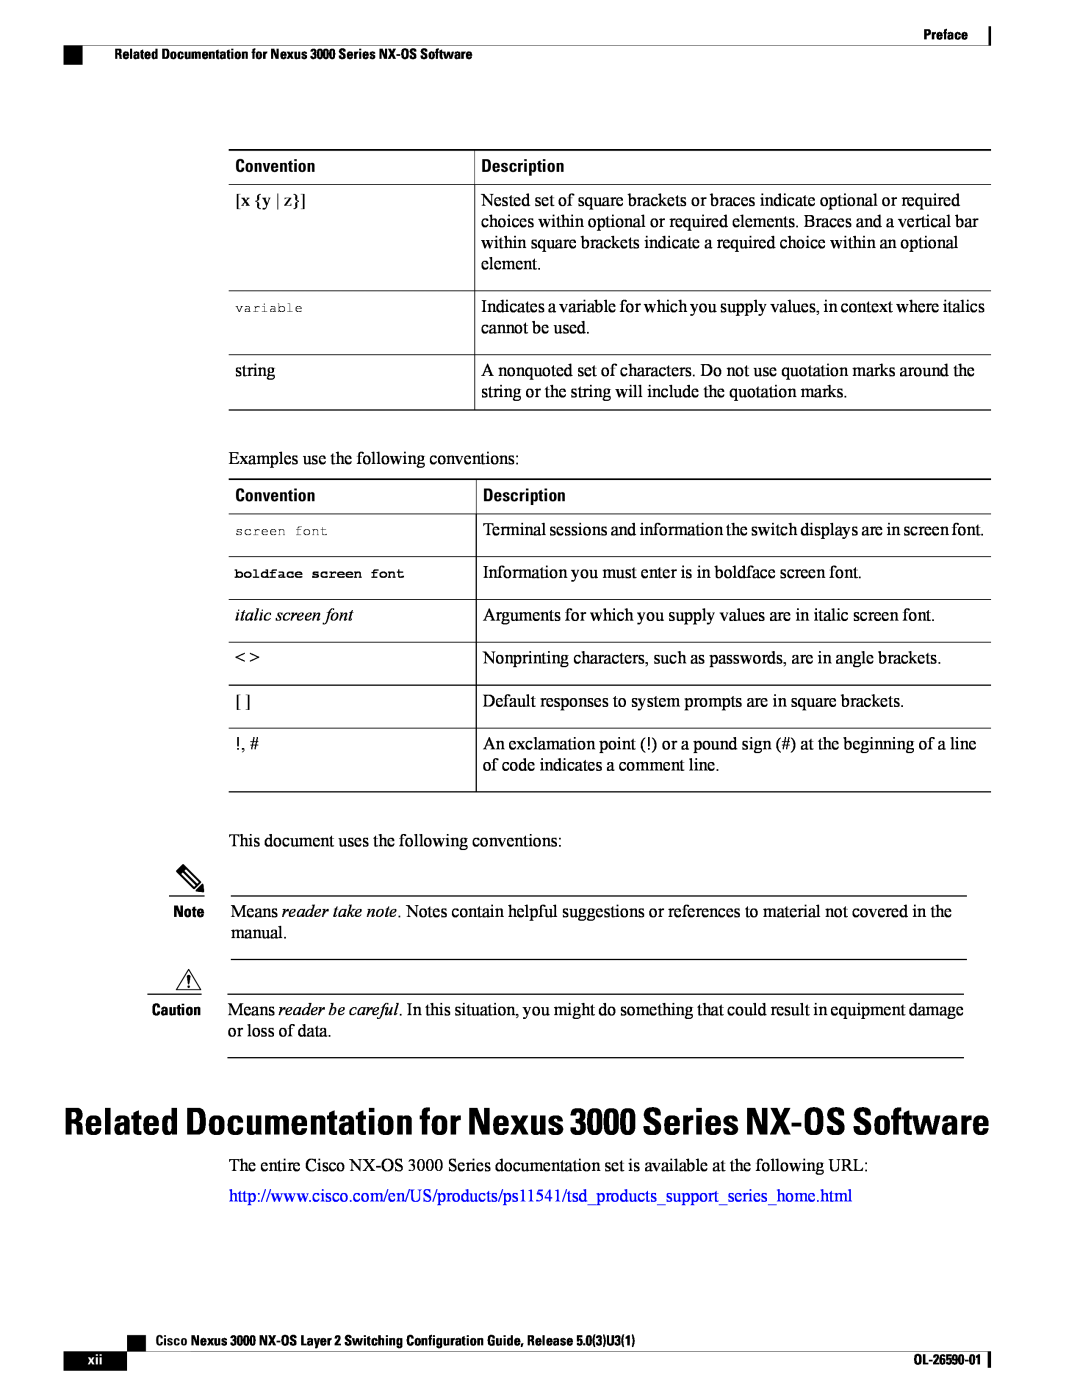 Cisco Systems N3KC3048TP1GE manual Related Documentation for Nexus 3000 Series NX-OS Software, Convention, Description 